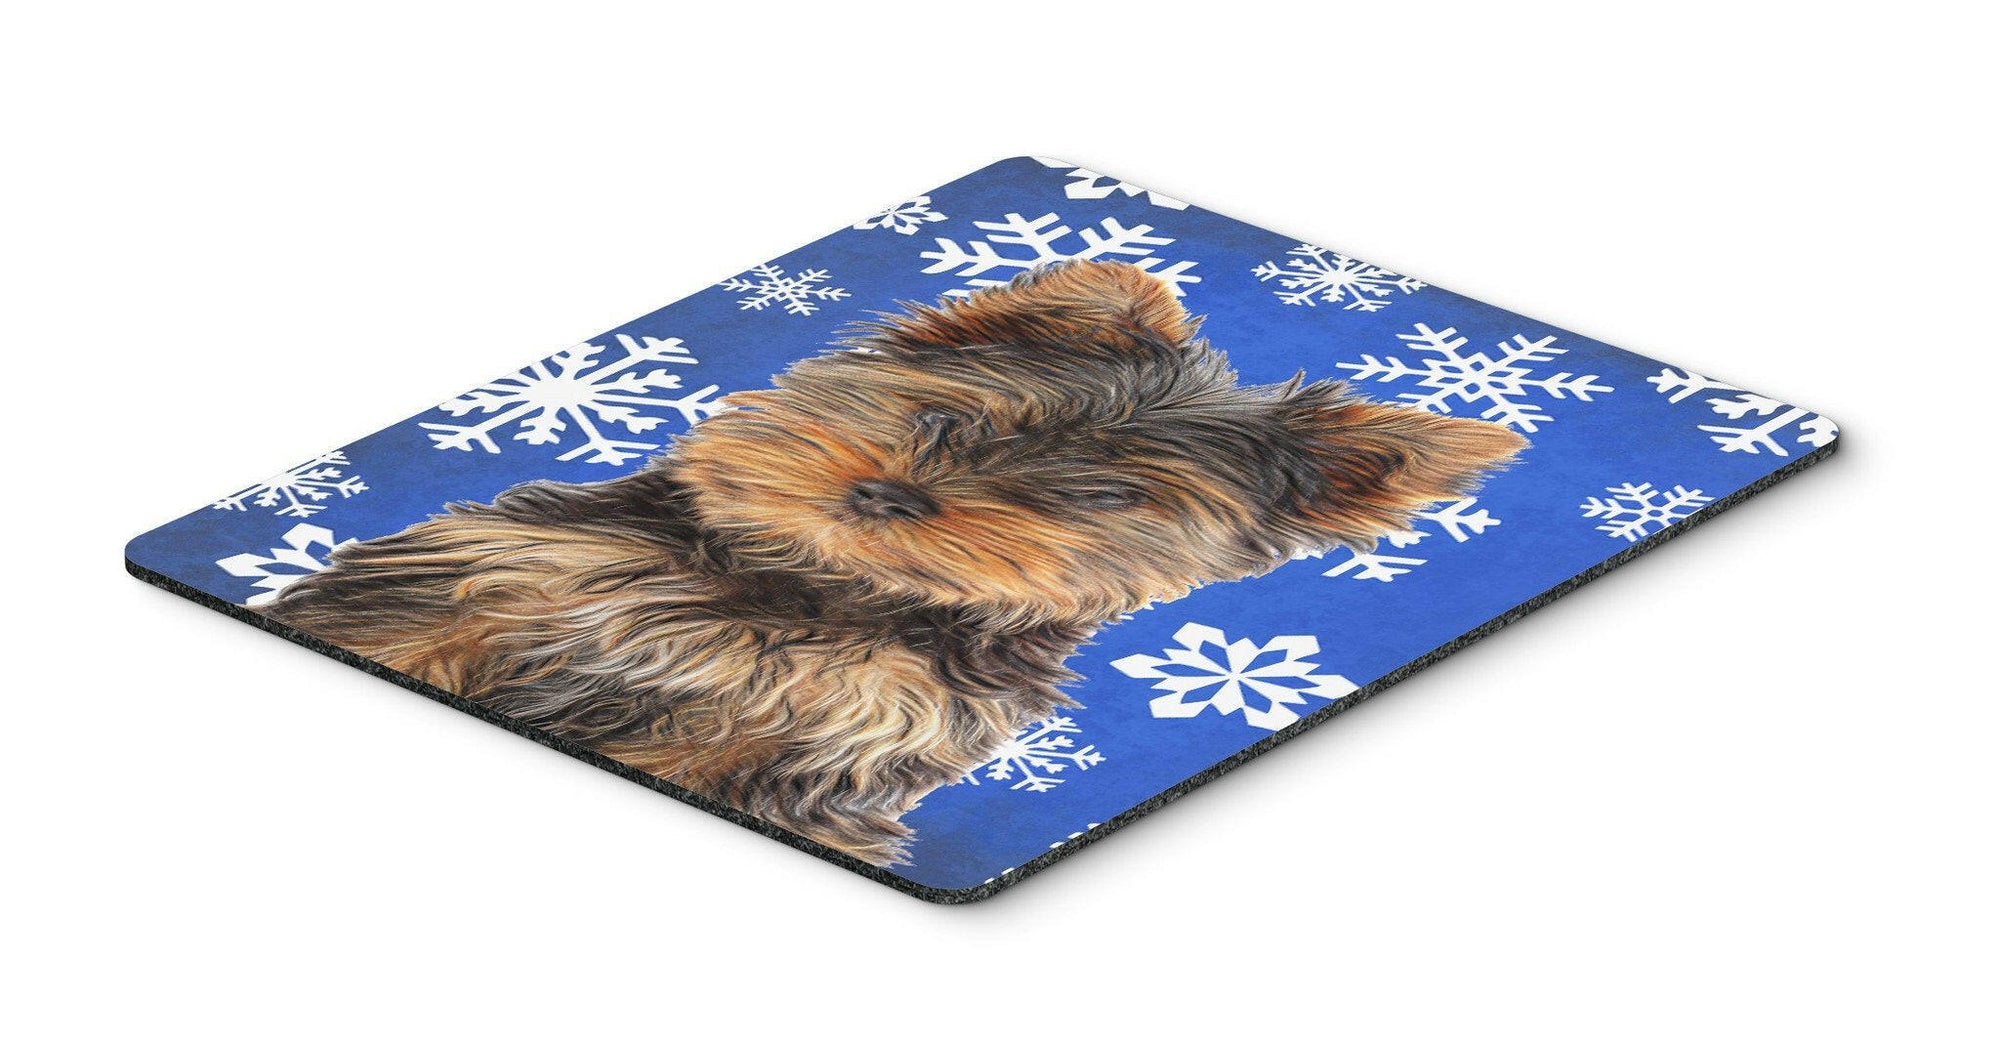 Winter Snowflakes Holiday Yorkie Puppy / Yorkshire Terrier Mouse Pad, Hot Pad or Trivet KJ1181MP by Caroline's Treasures